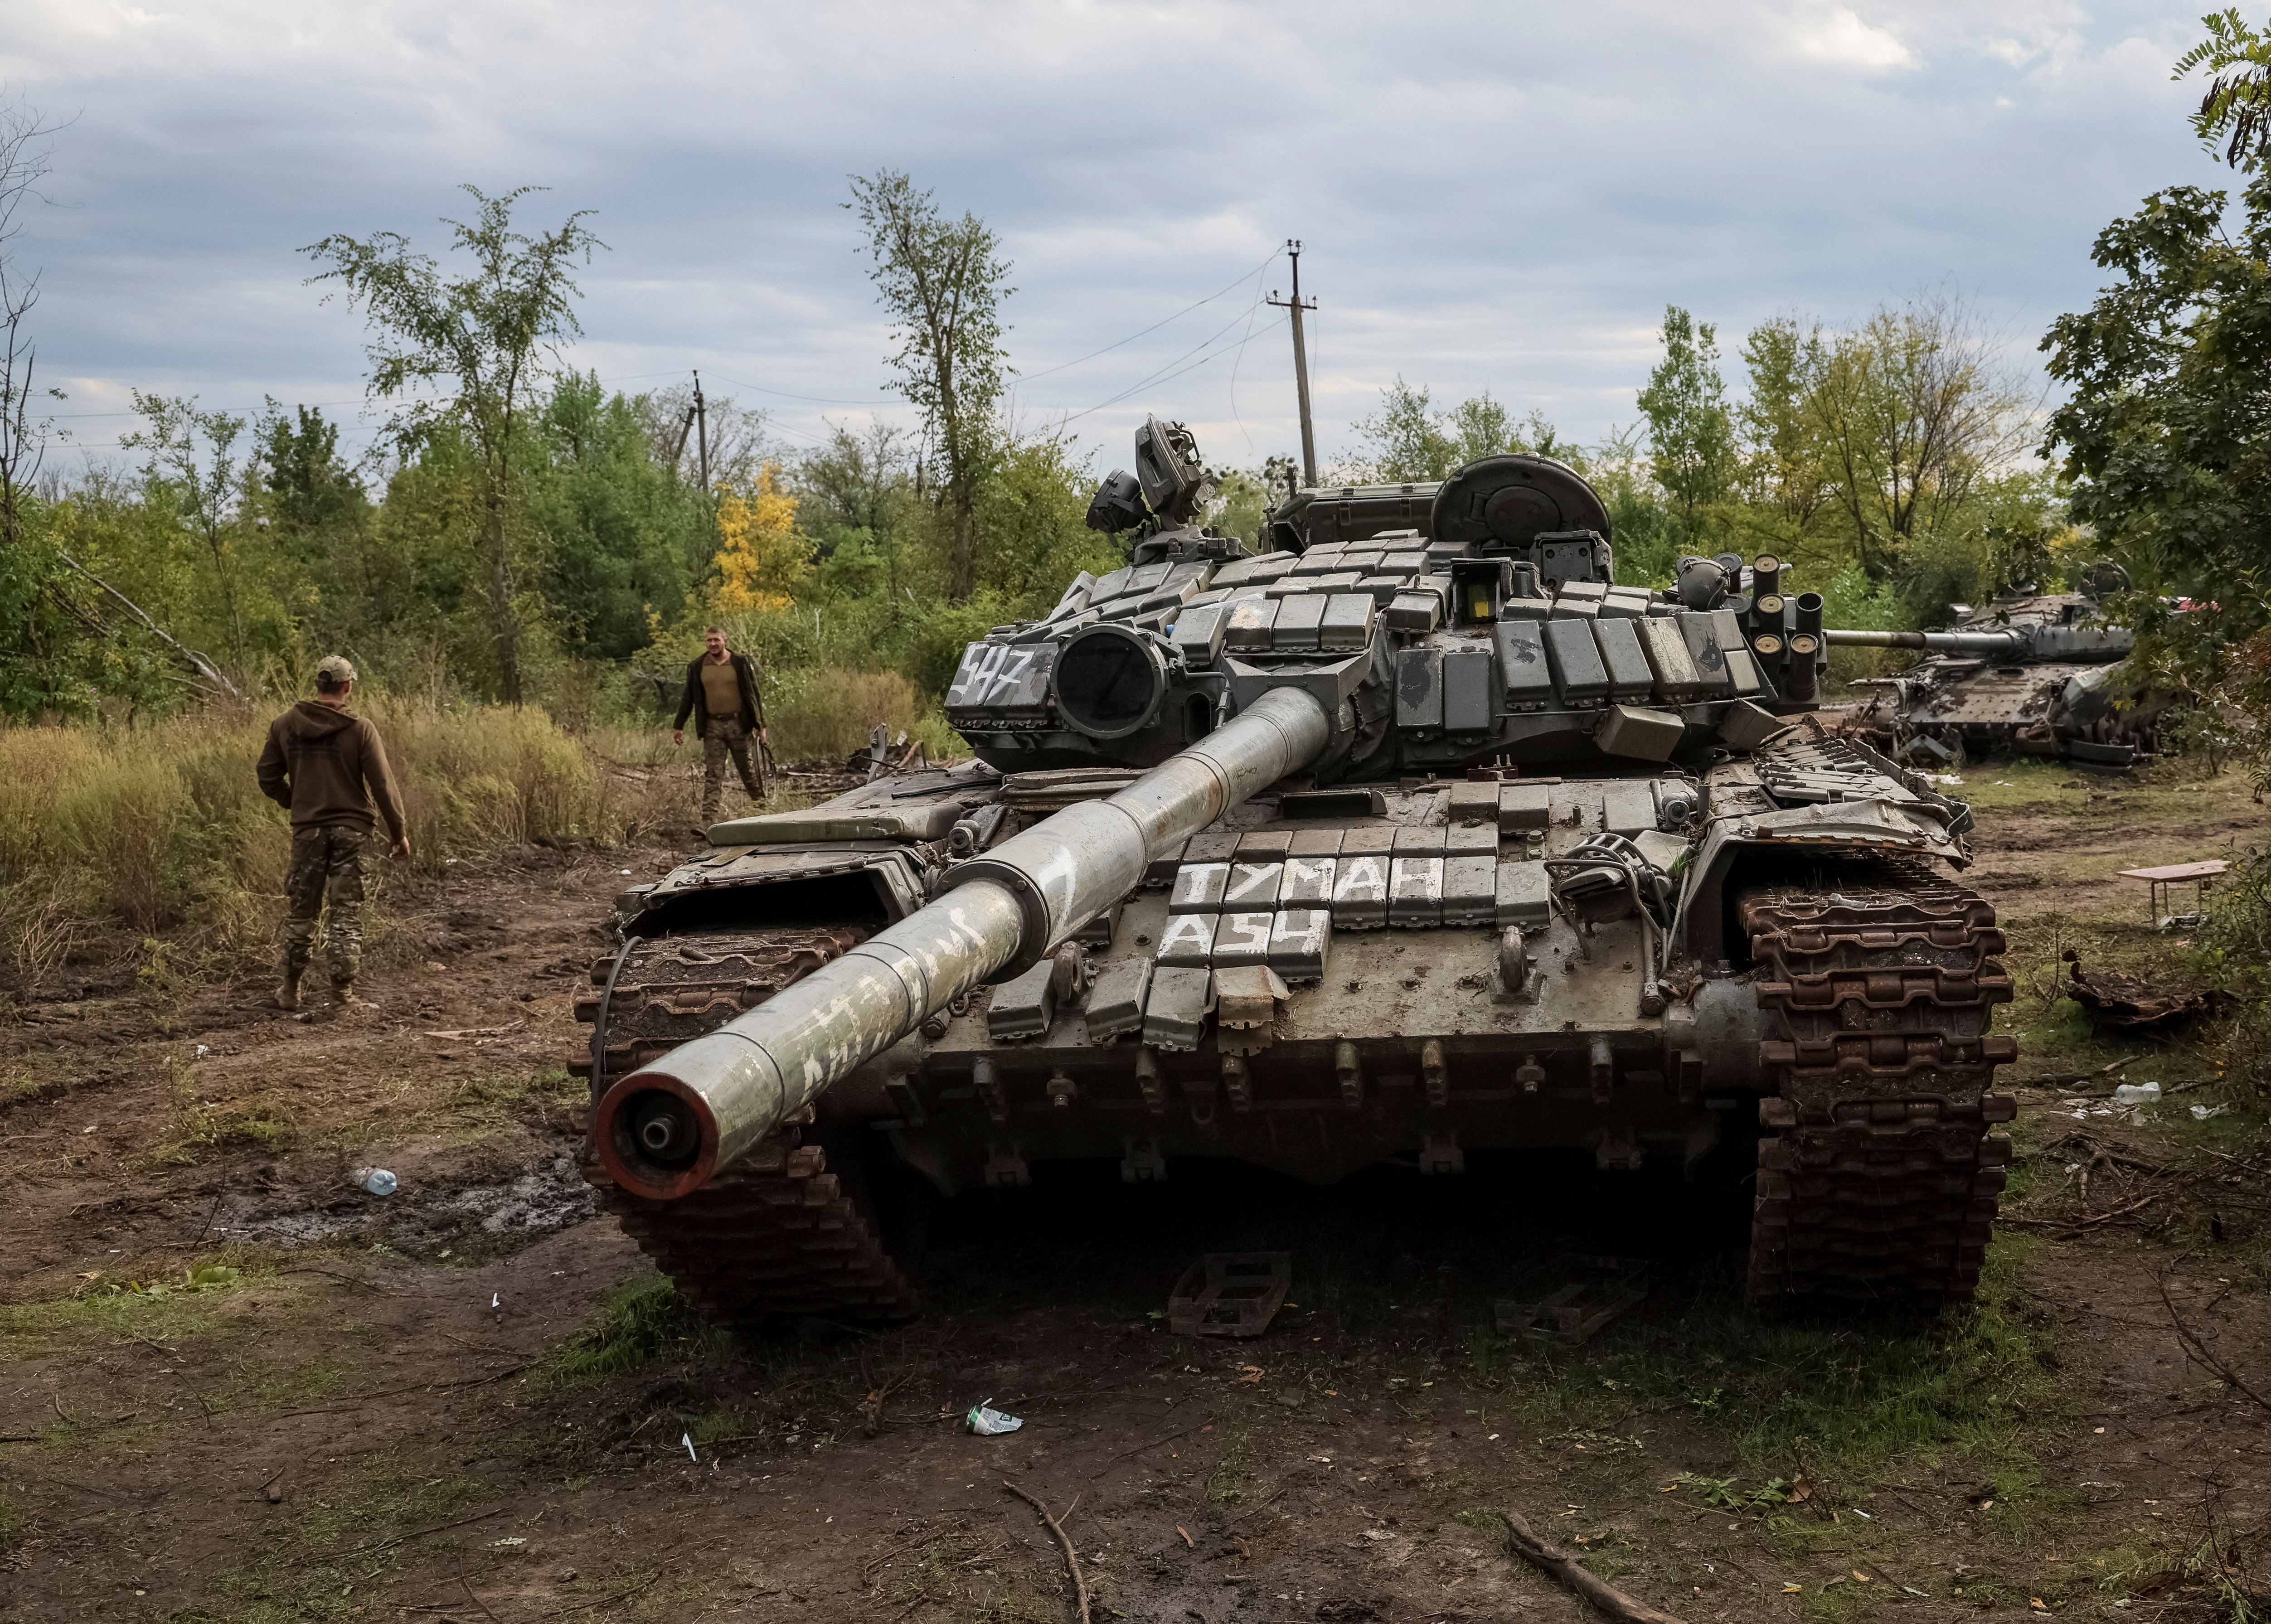 Russia refits old tanks after losing 3,000 in Ukraine - research